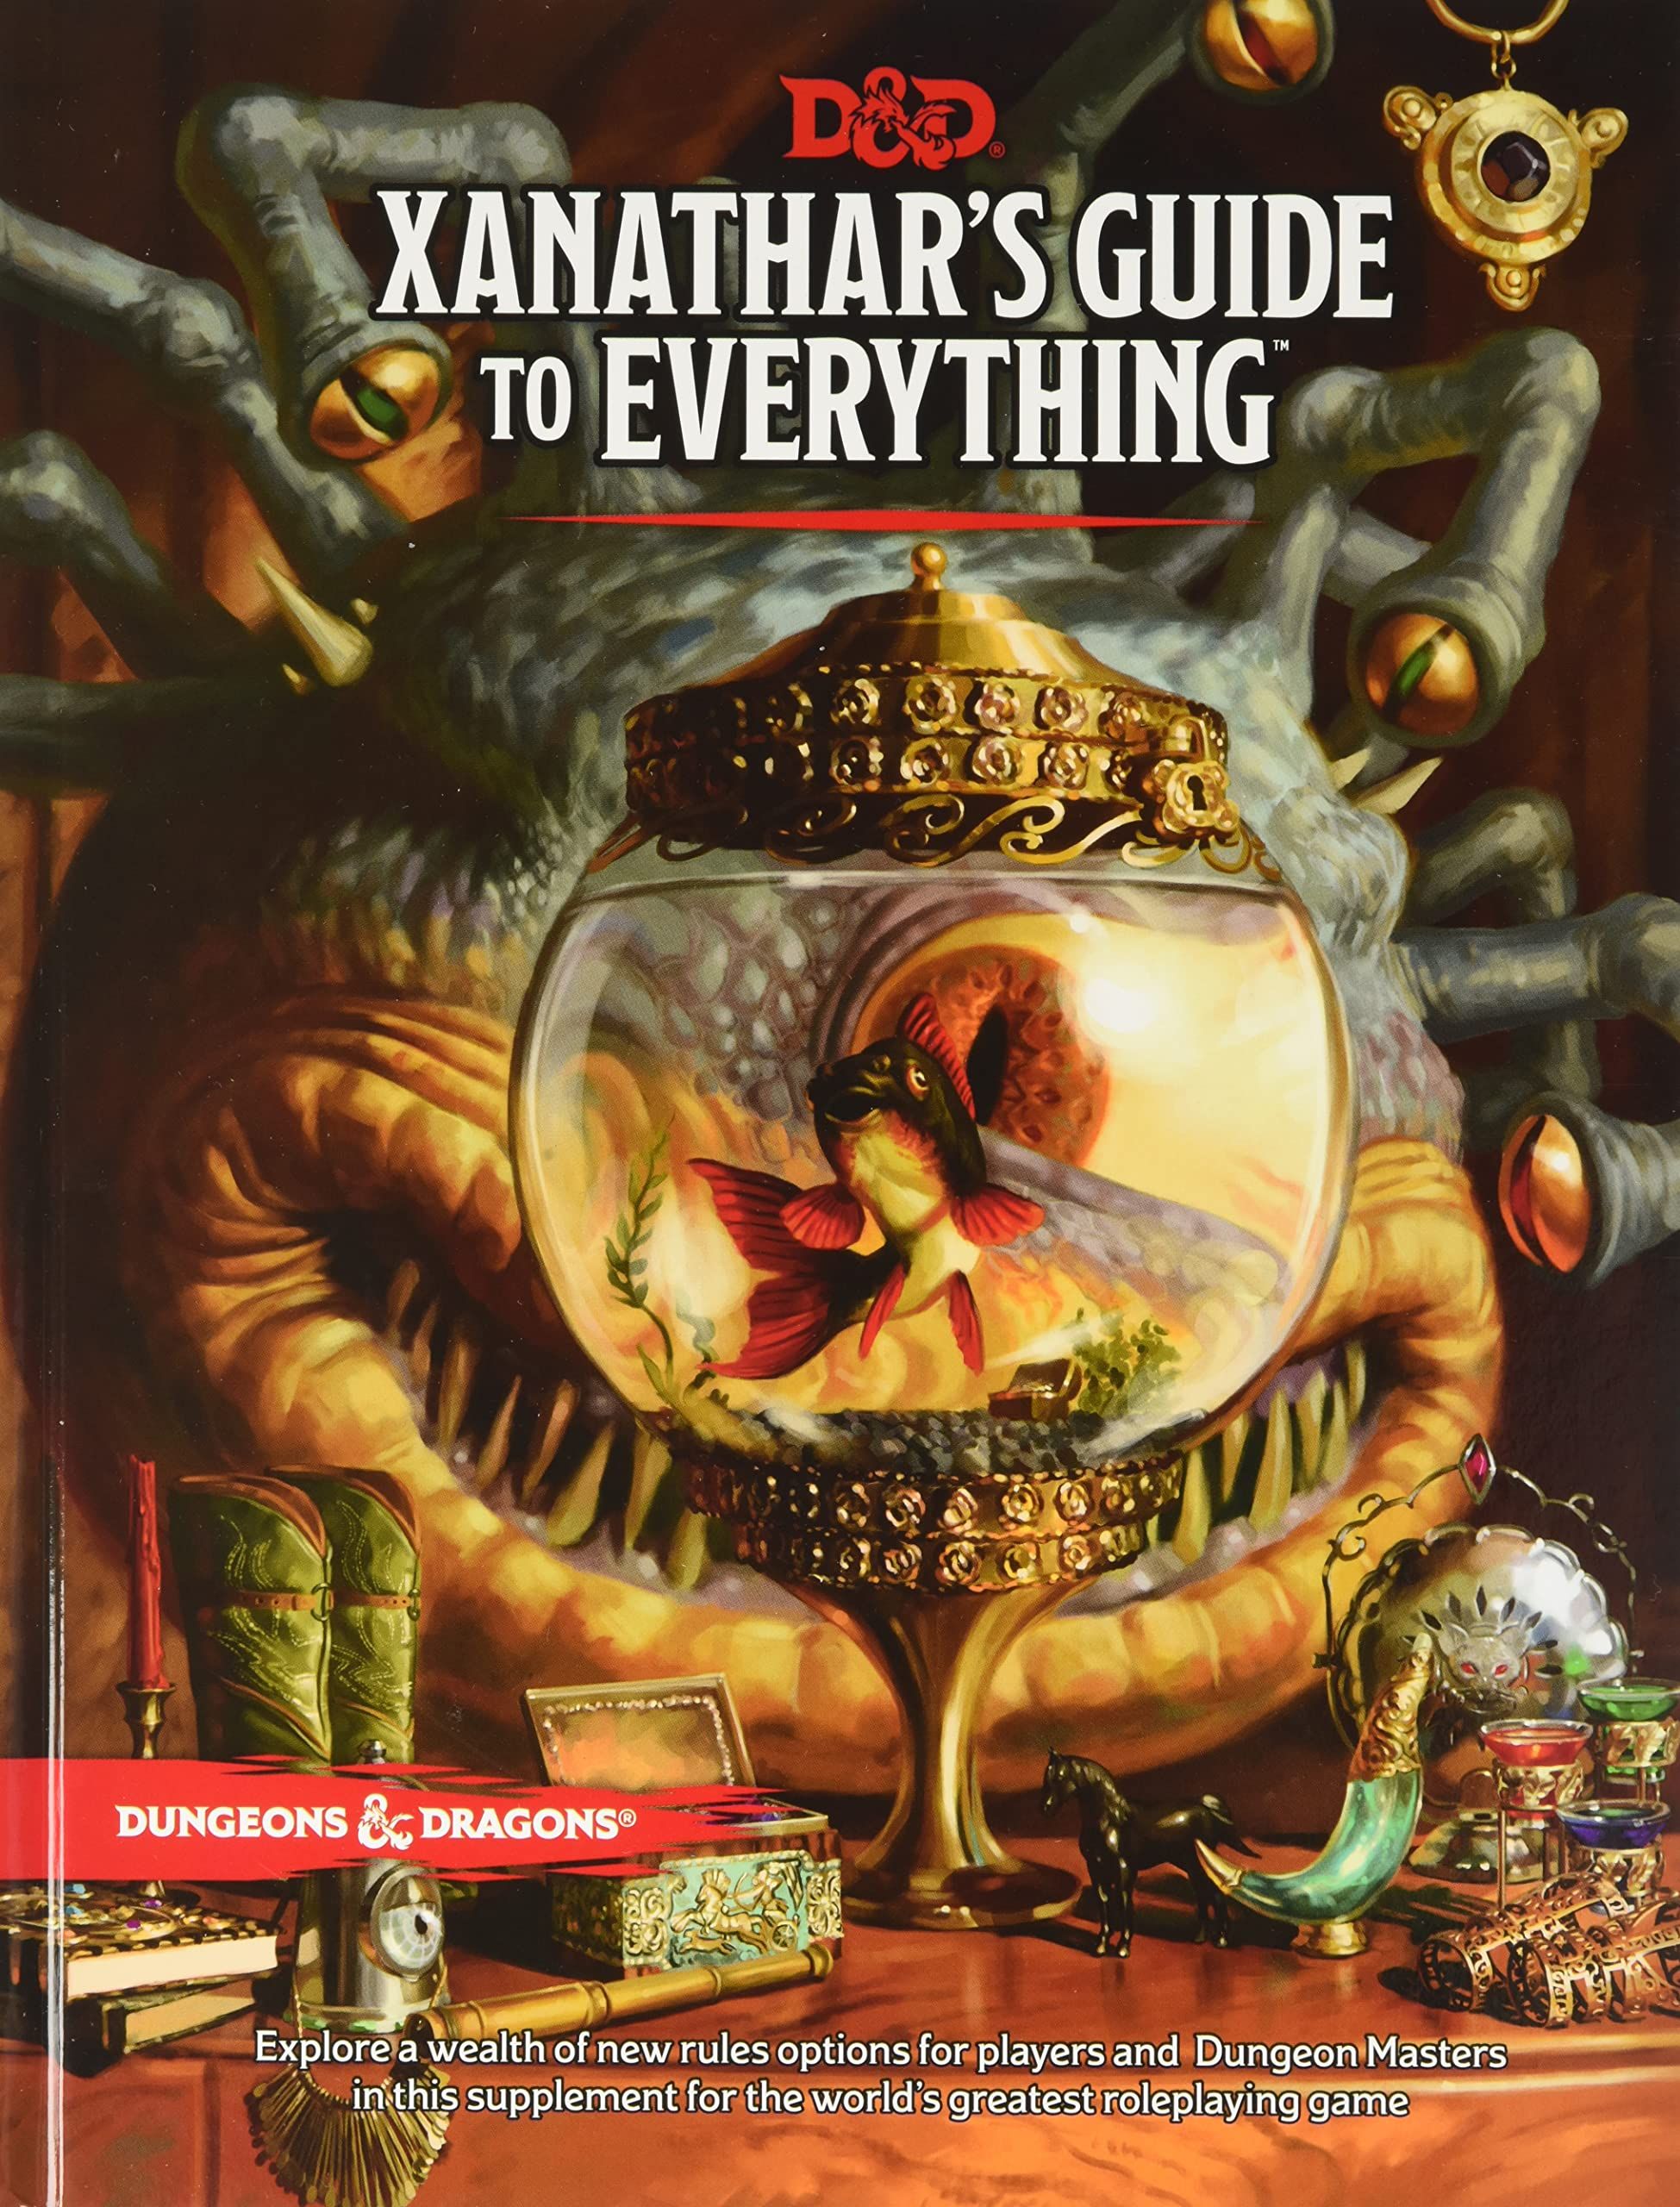 The covers of the Xanathar Guide to Everything